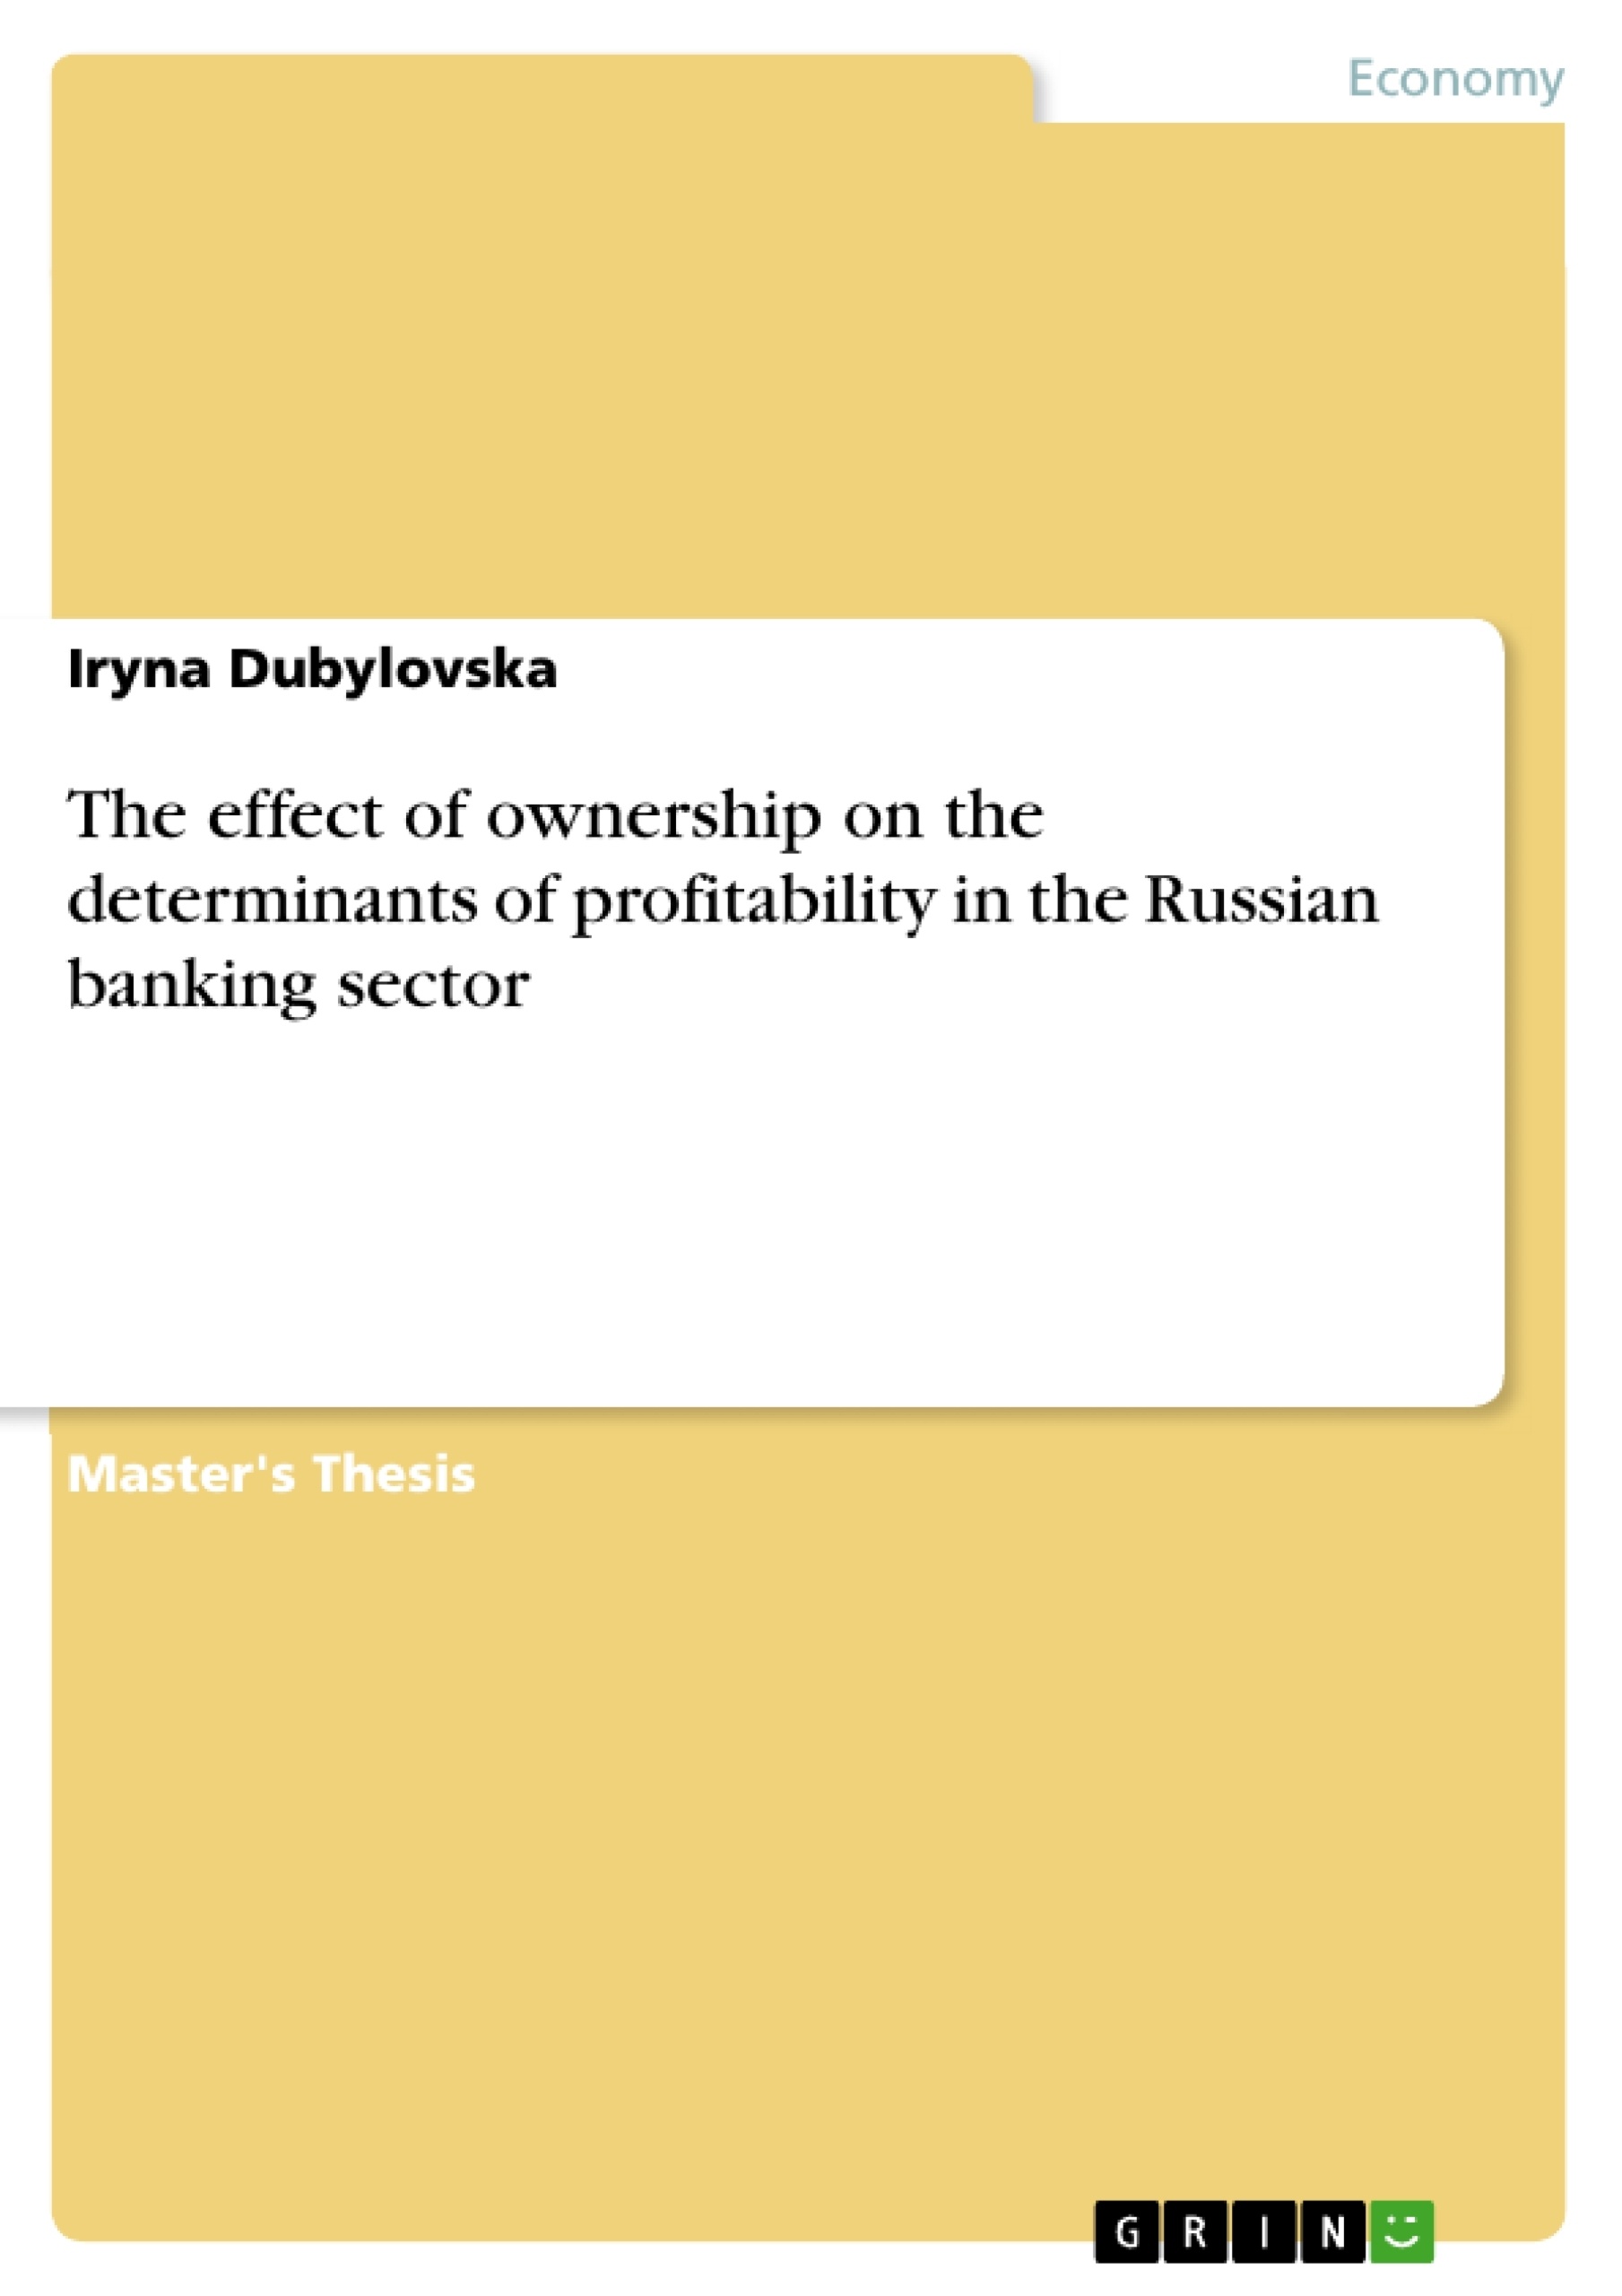 Titre: The effect of ownership on the determinants of profitability in the Russian banking sector